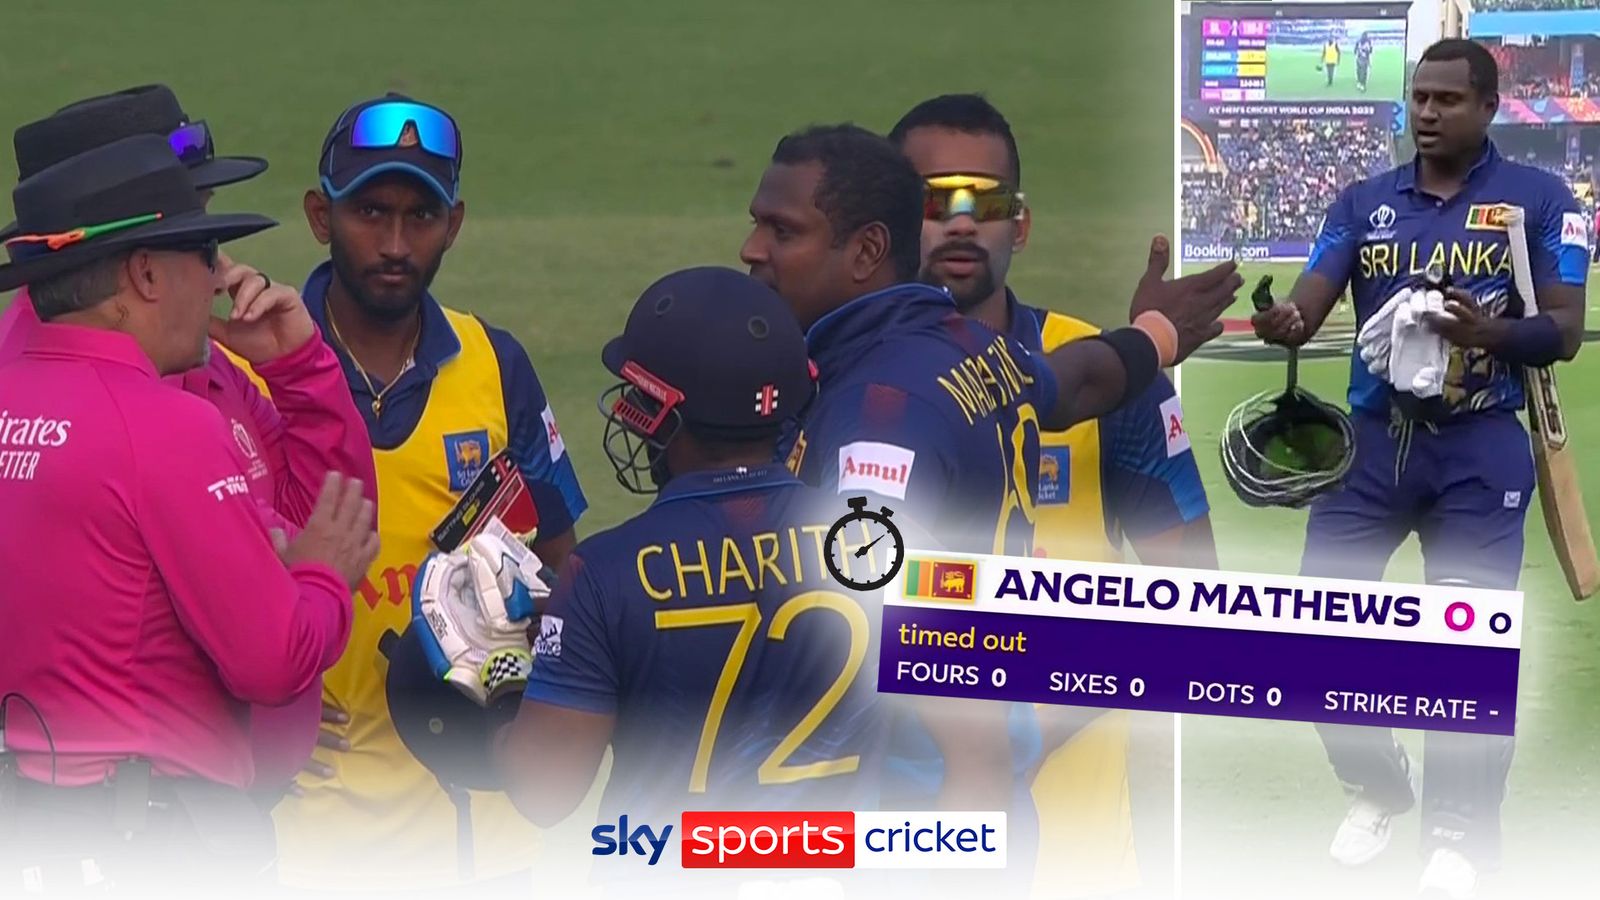 Sri Lanka's Angelo Mathews timed out in international cricket first ...